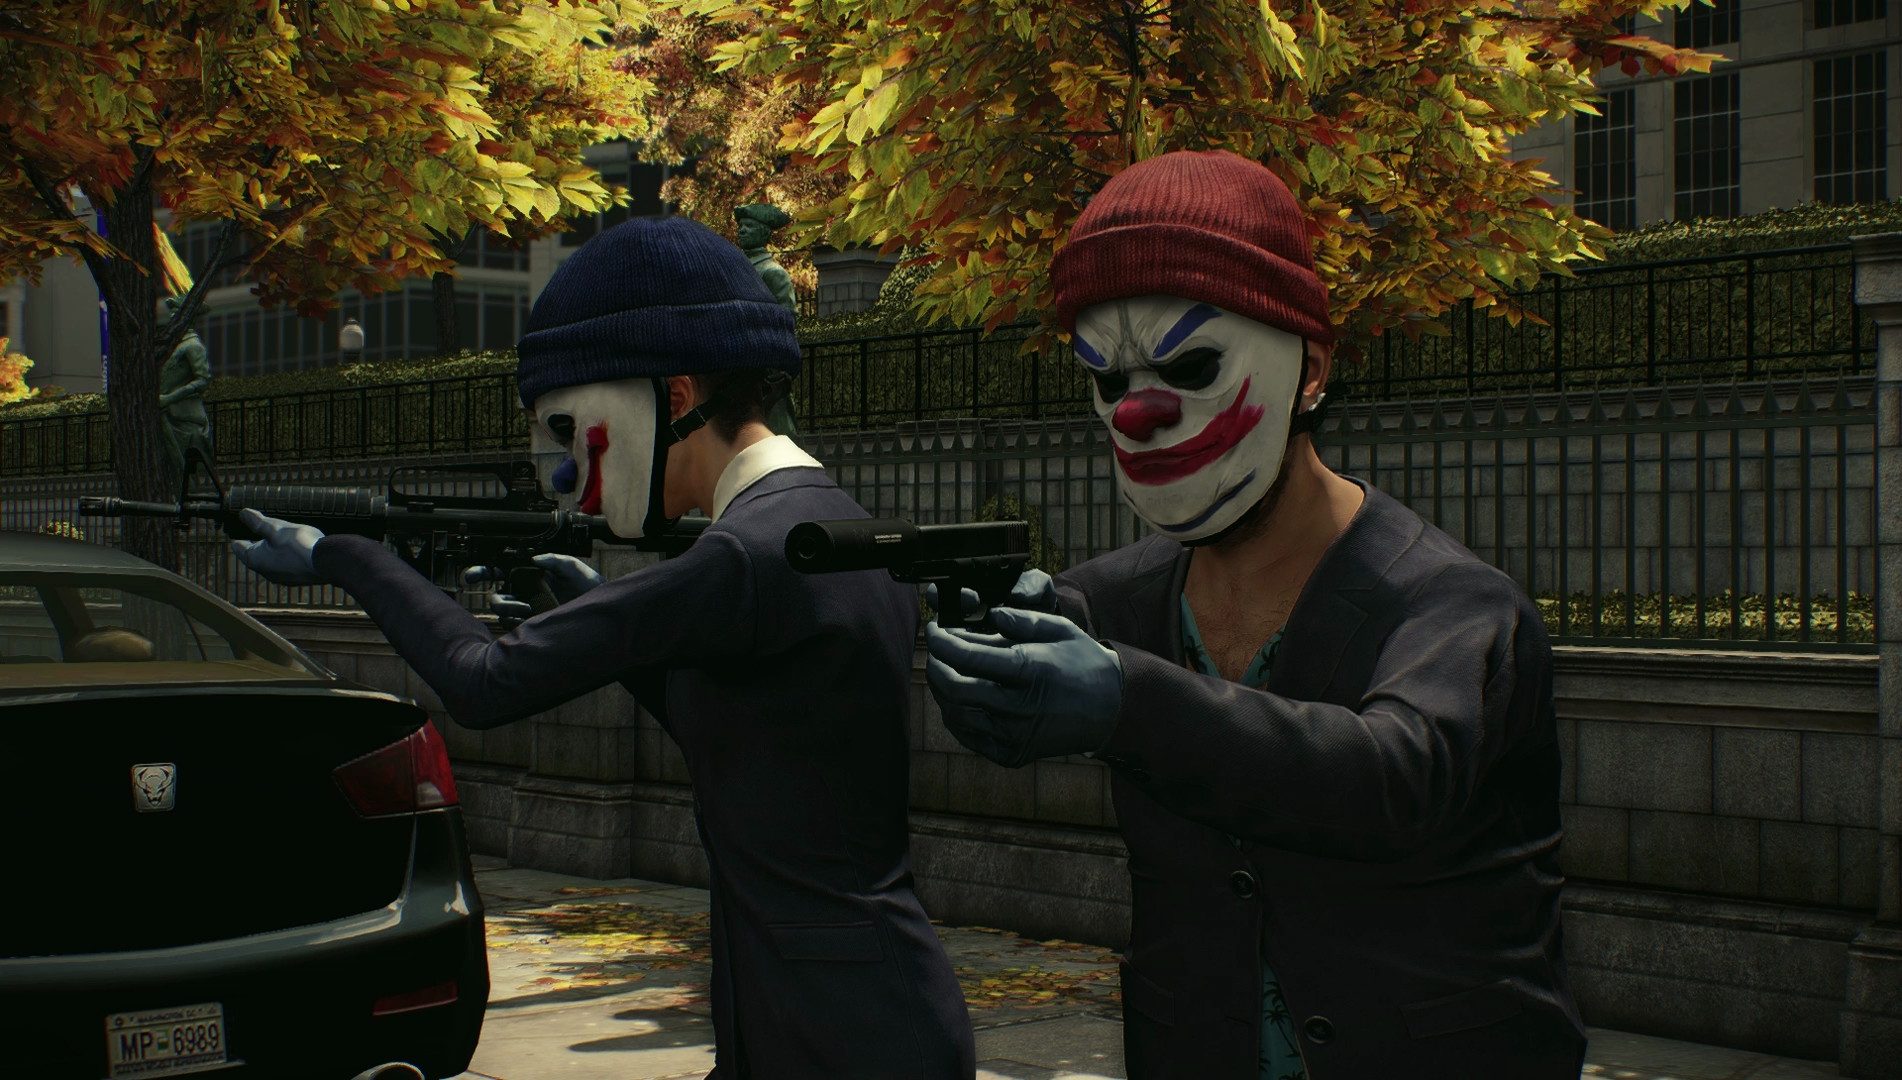 PAYDAY 2: h3h3 Character Pack on Steam